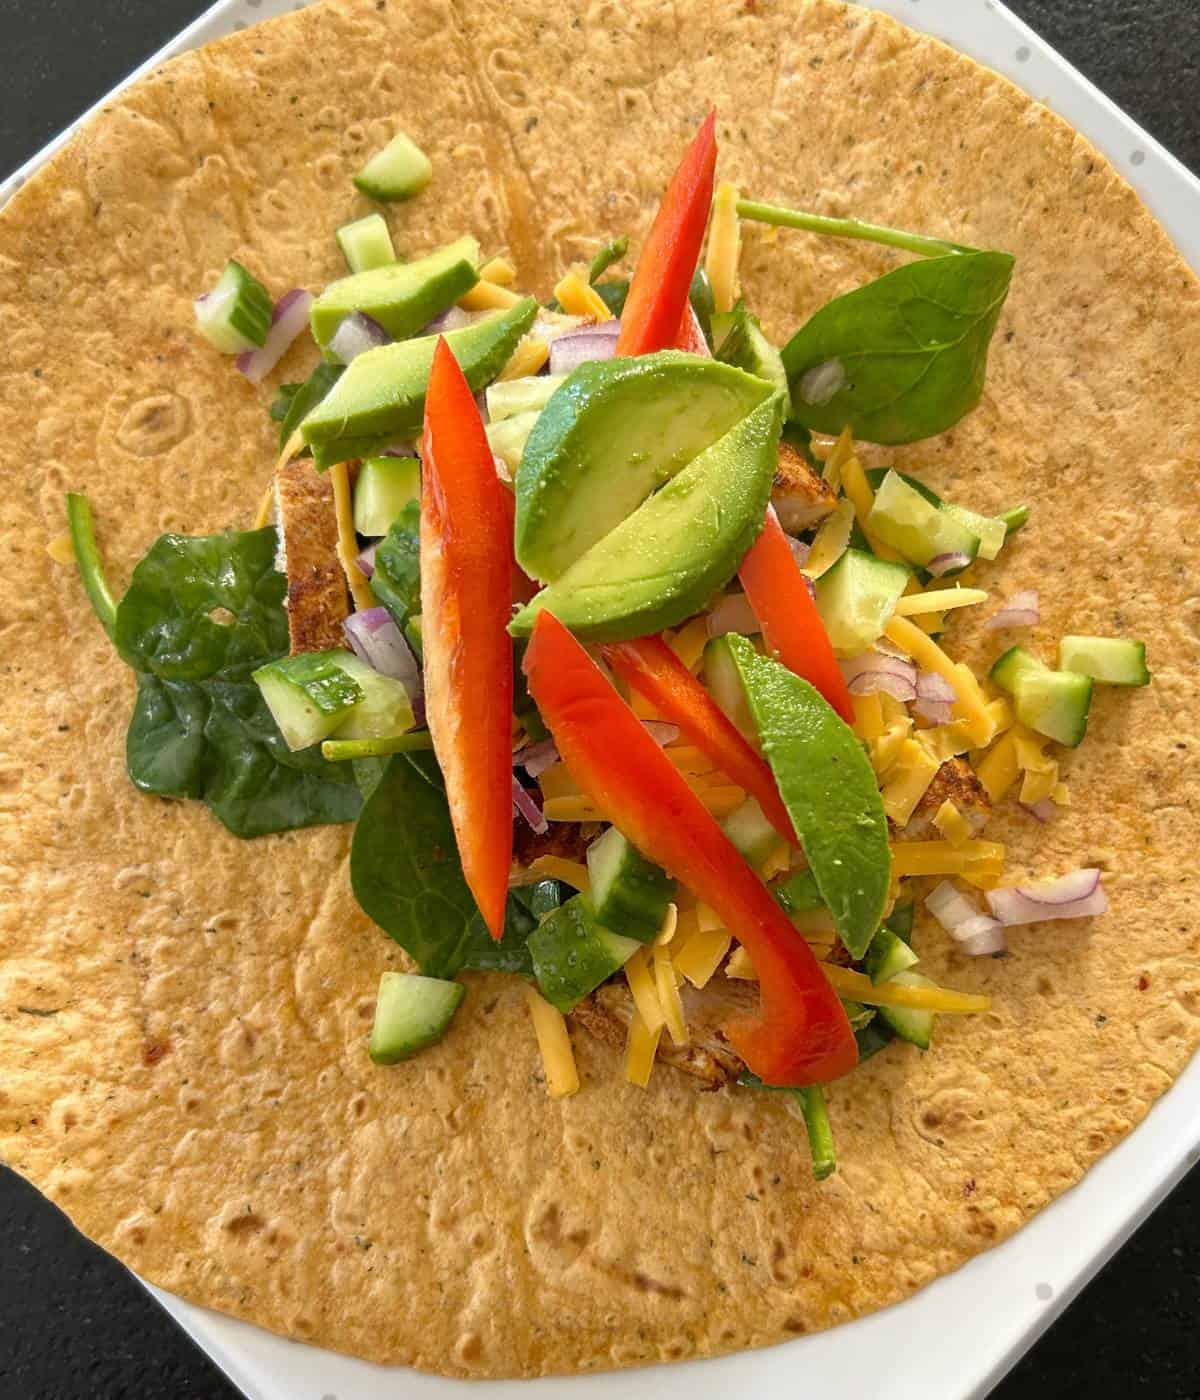 A wrap loaded with ingredients.